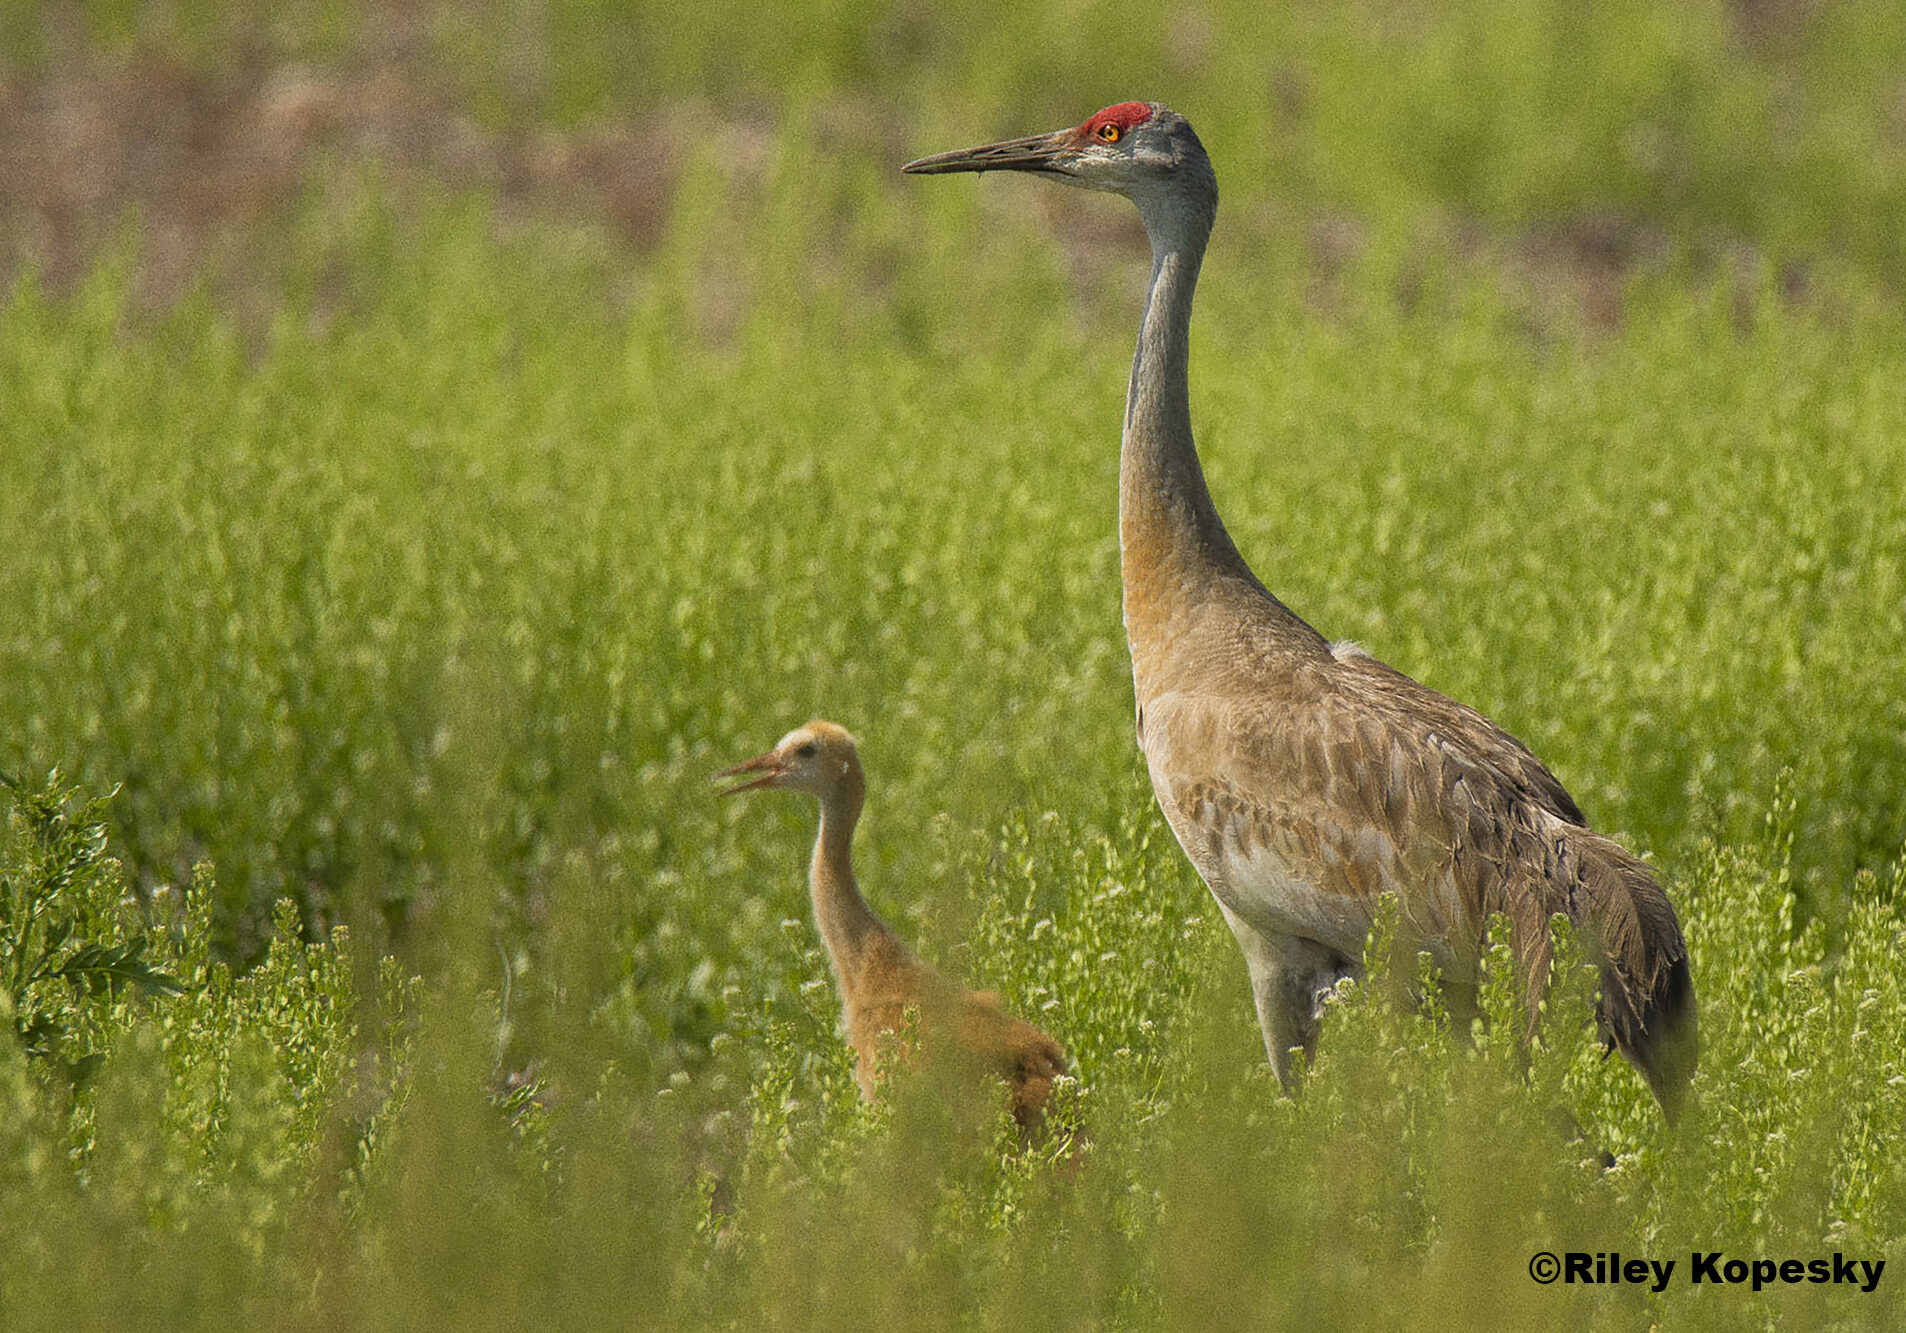 A mother and son sandhill crane standing in tall grass